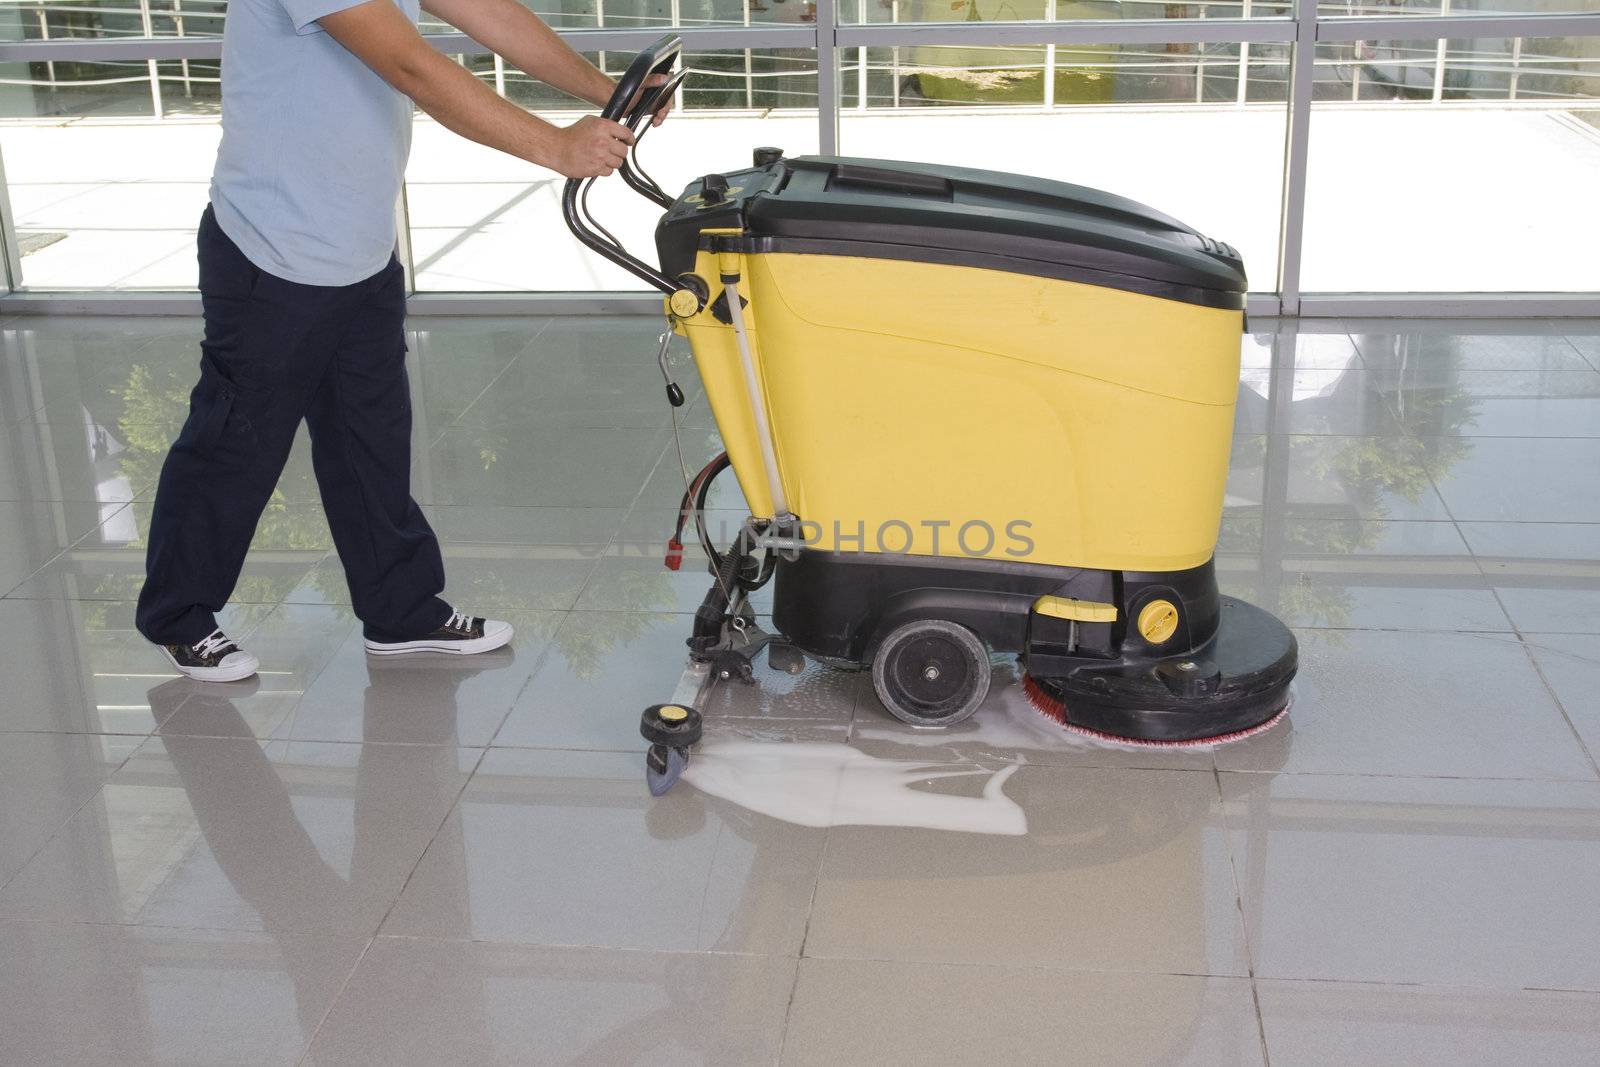 A worker is cleaning the floor with equipment